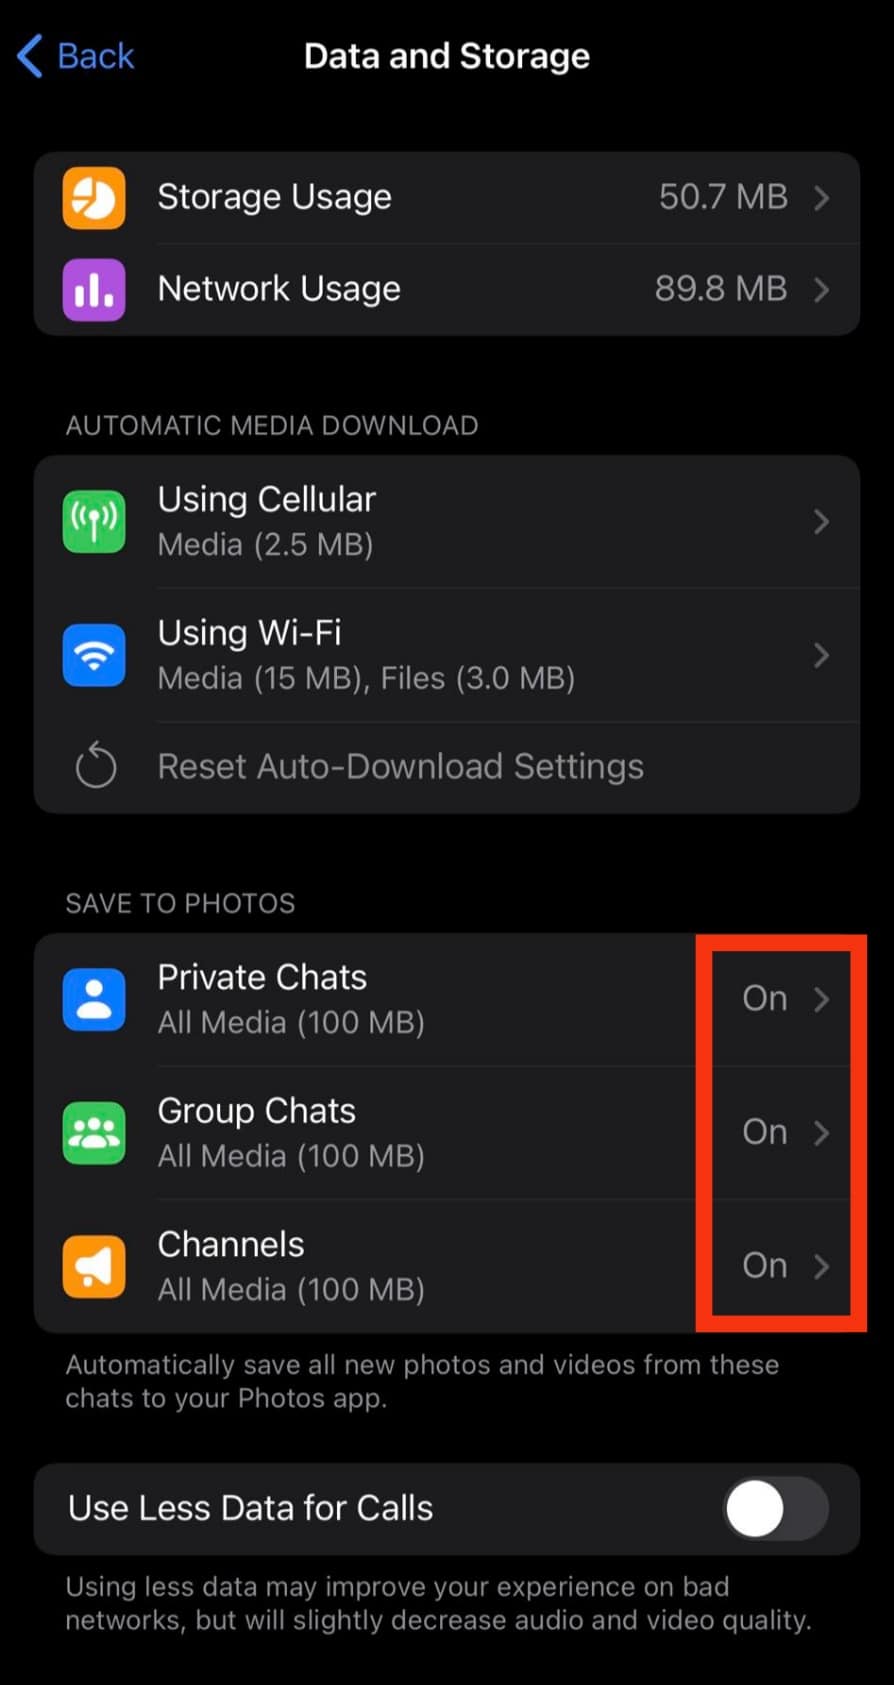 Enable The Private Chats, Groups, And Channels Options.